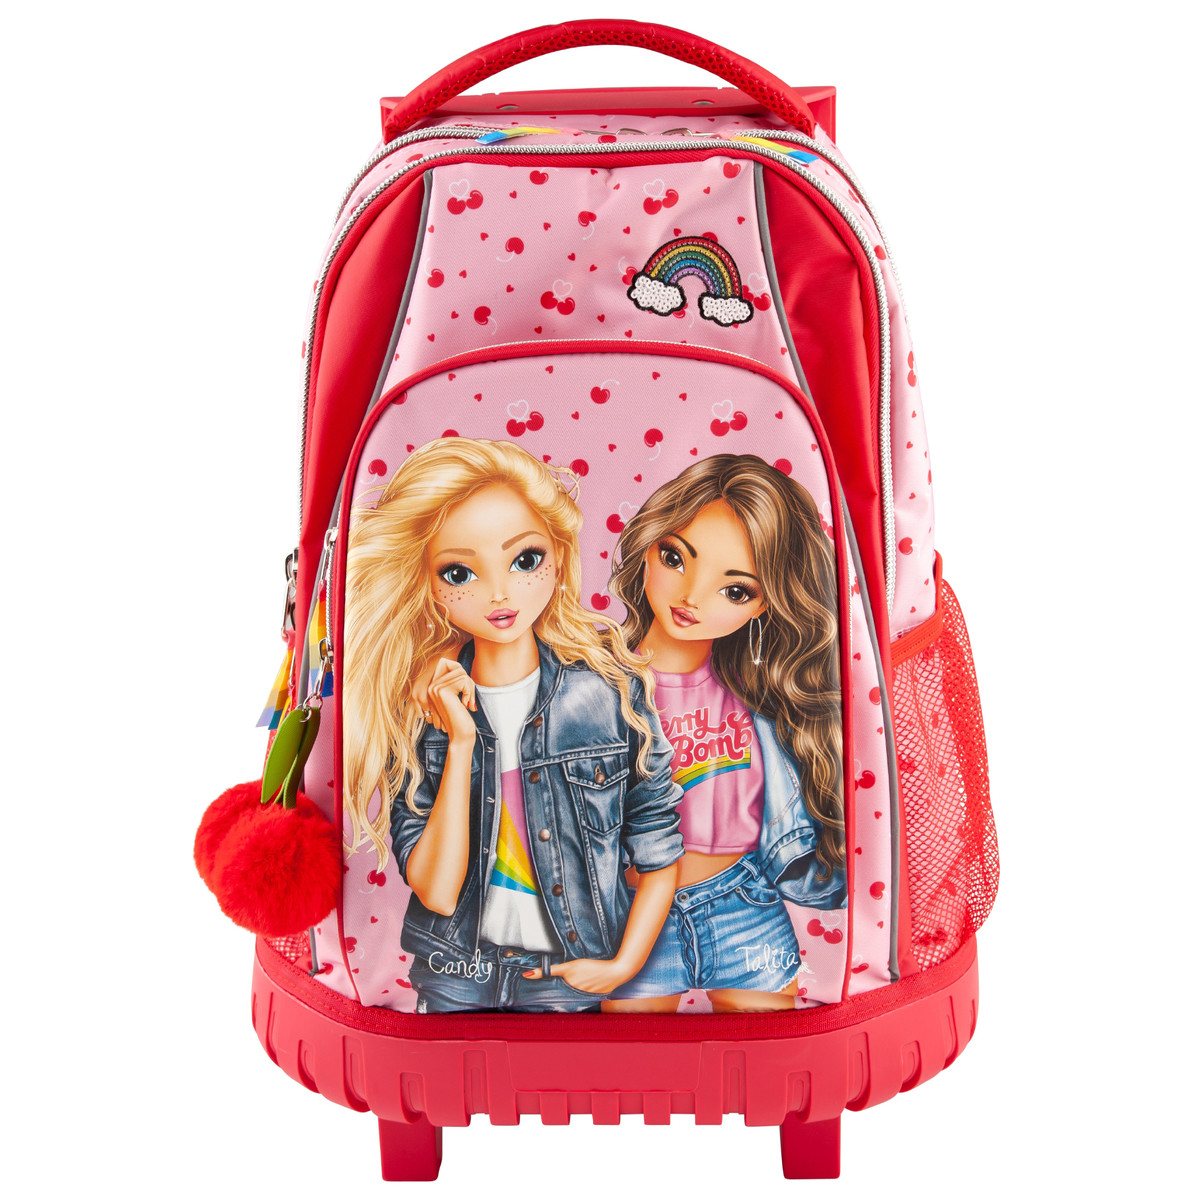 Top Model - Backpack Trolley - Cherry Bomb (410995)